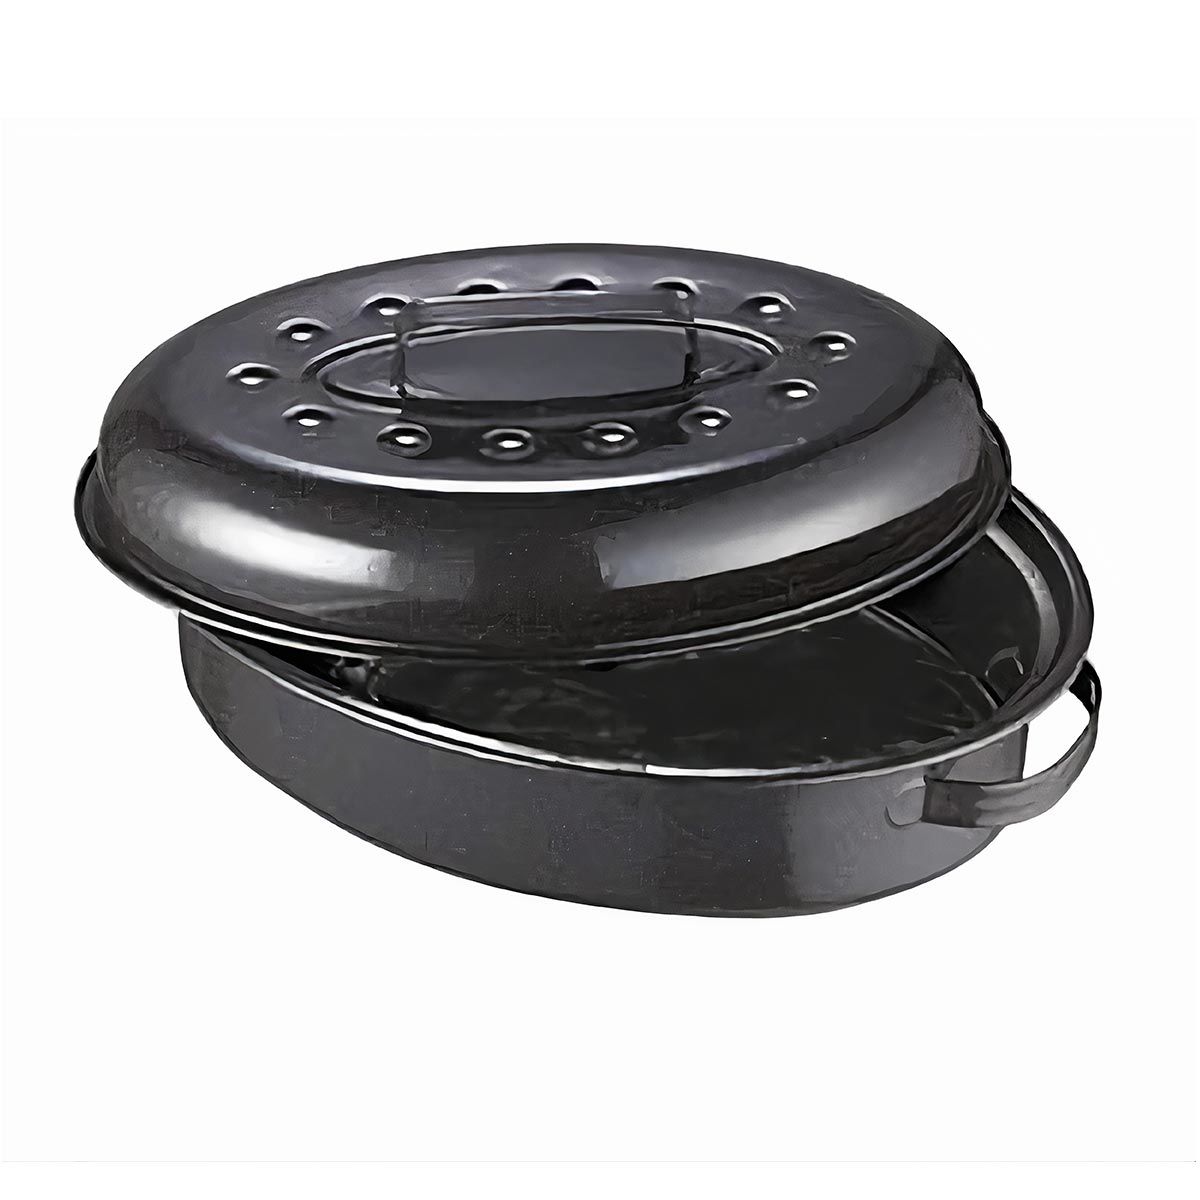 Solar Brother CookUp cooking pot for Sungood solar cooker